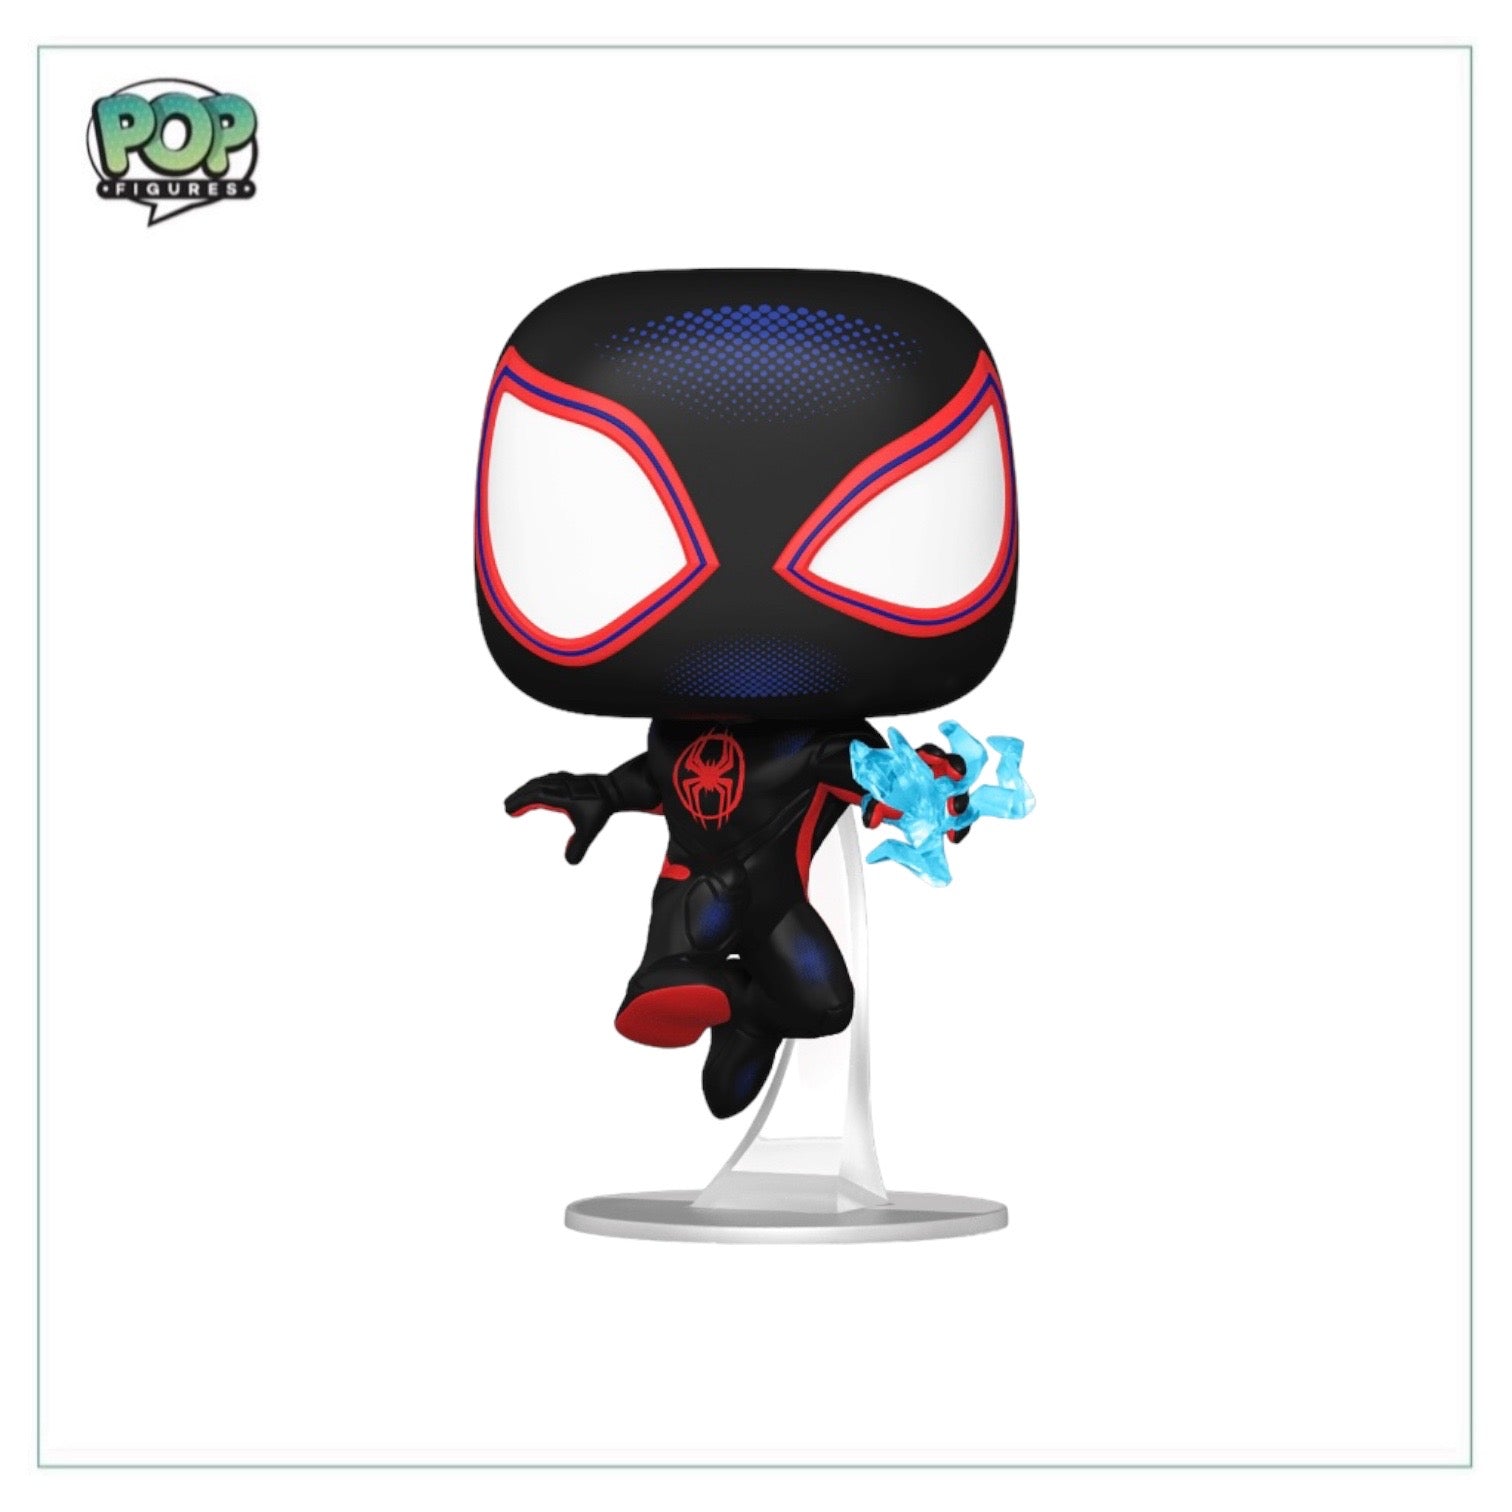 Spider-Man #1090 (w/ Electricity) Funko Pop! - Spider-Man Across the Spiderverse - Marvel Collector Corps Exclusive